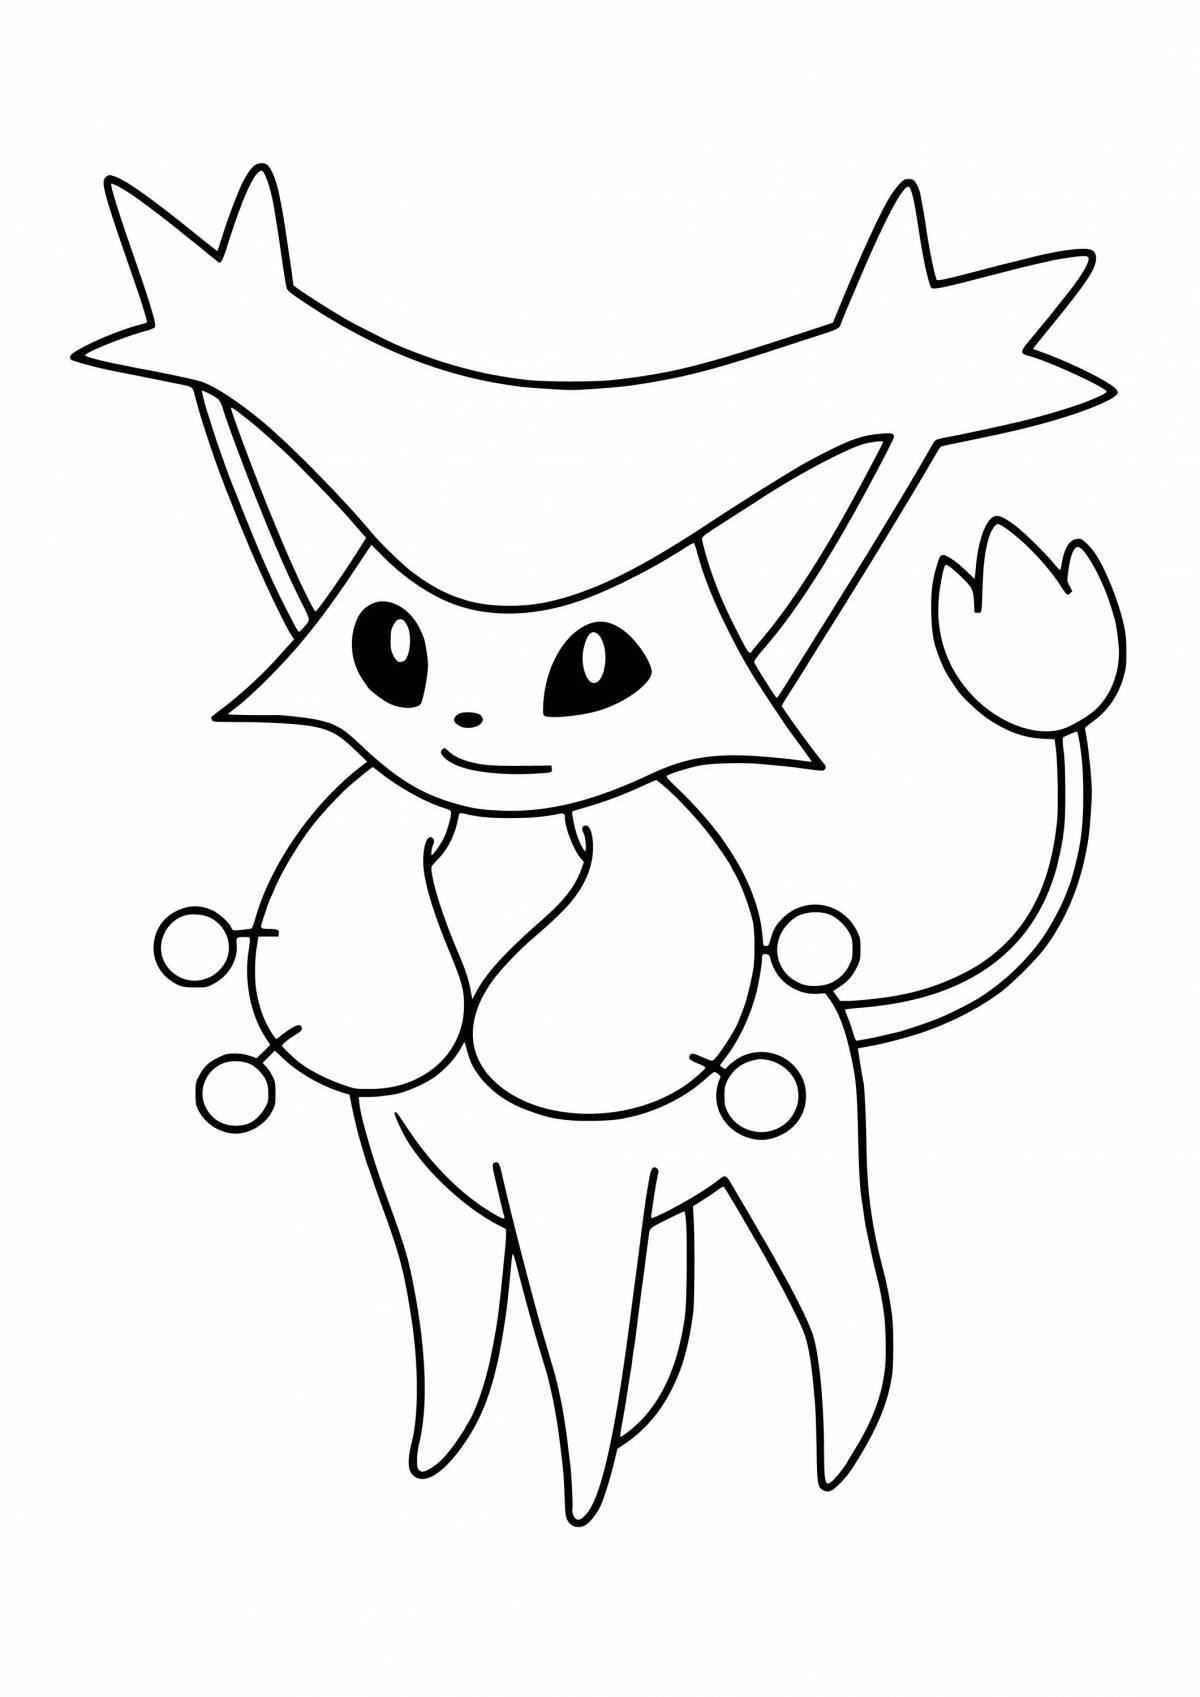 Exciting good quality pokemon coloring page